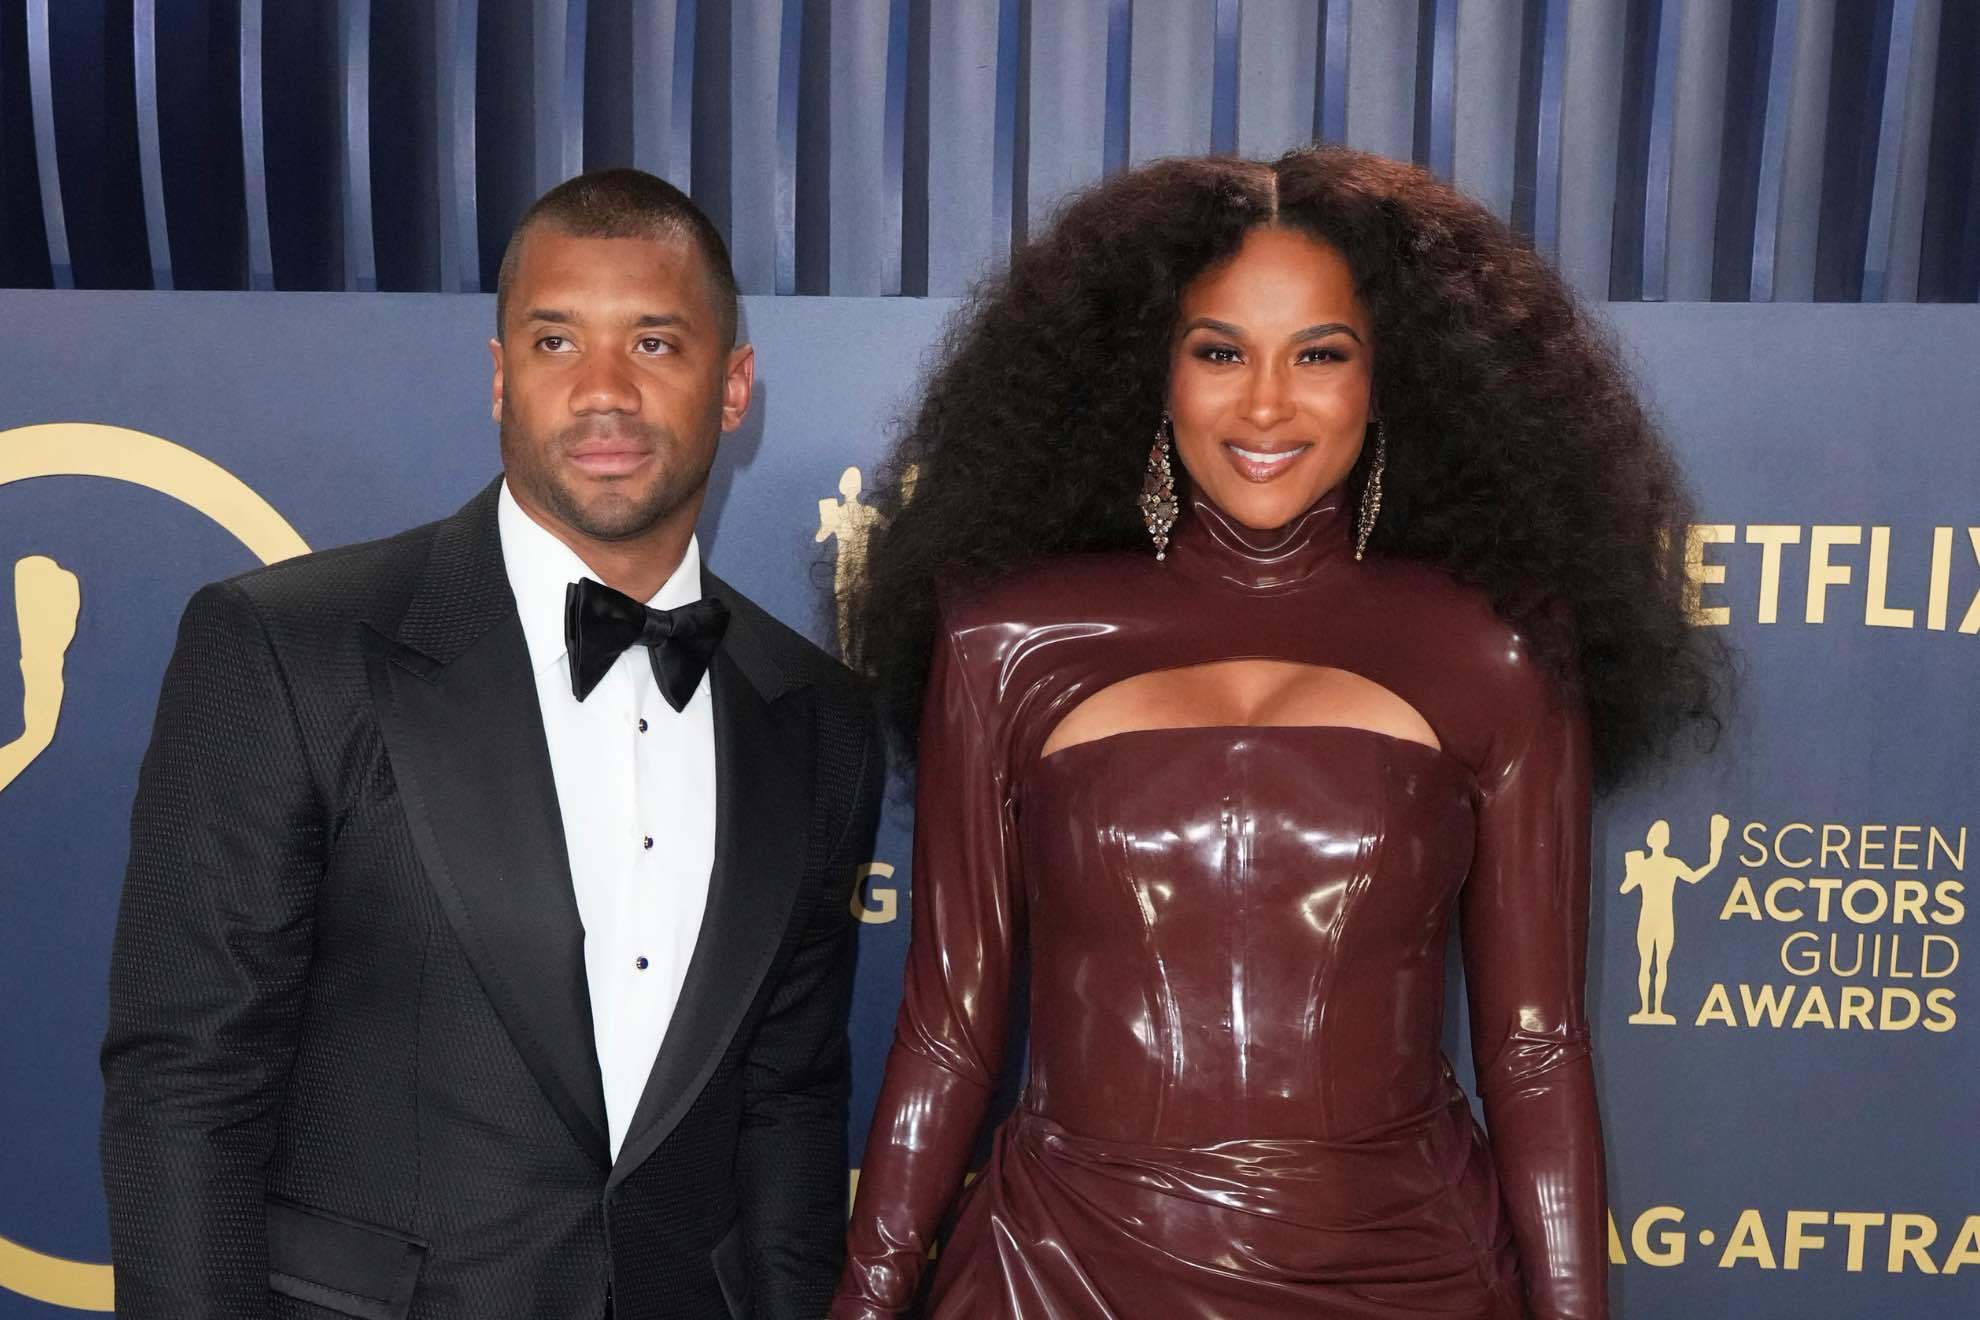 Ciara shared a suggestive video of her husband Russell Wilson at the SAG Awards